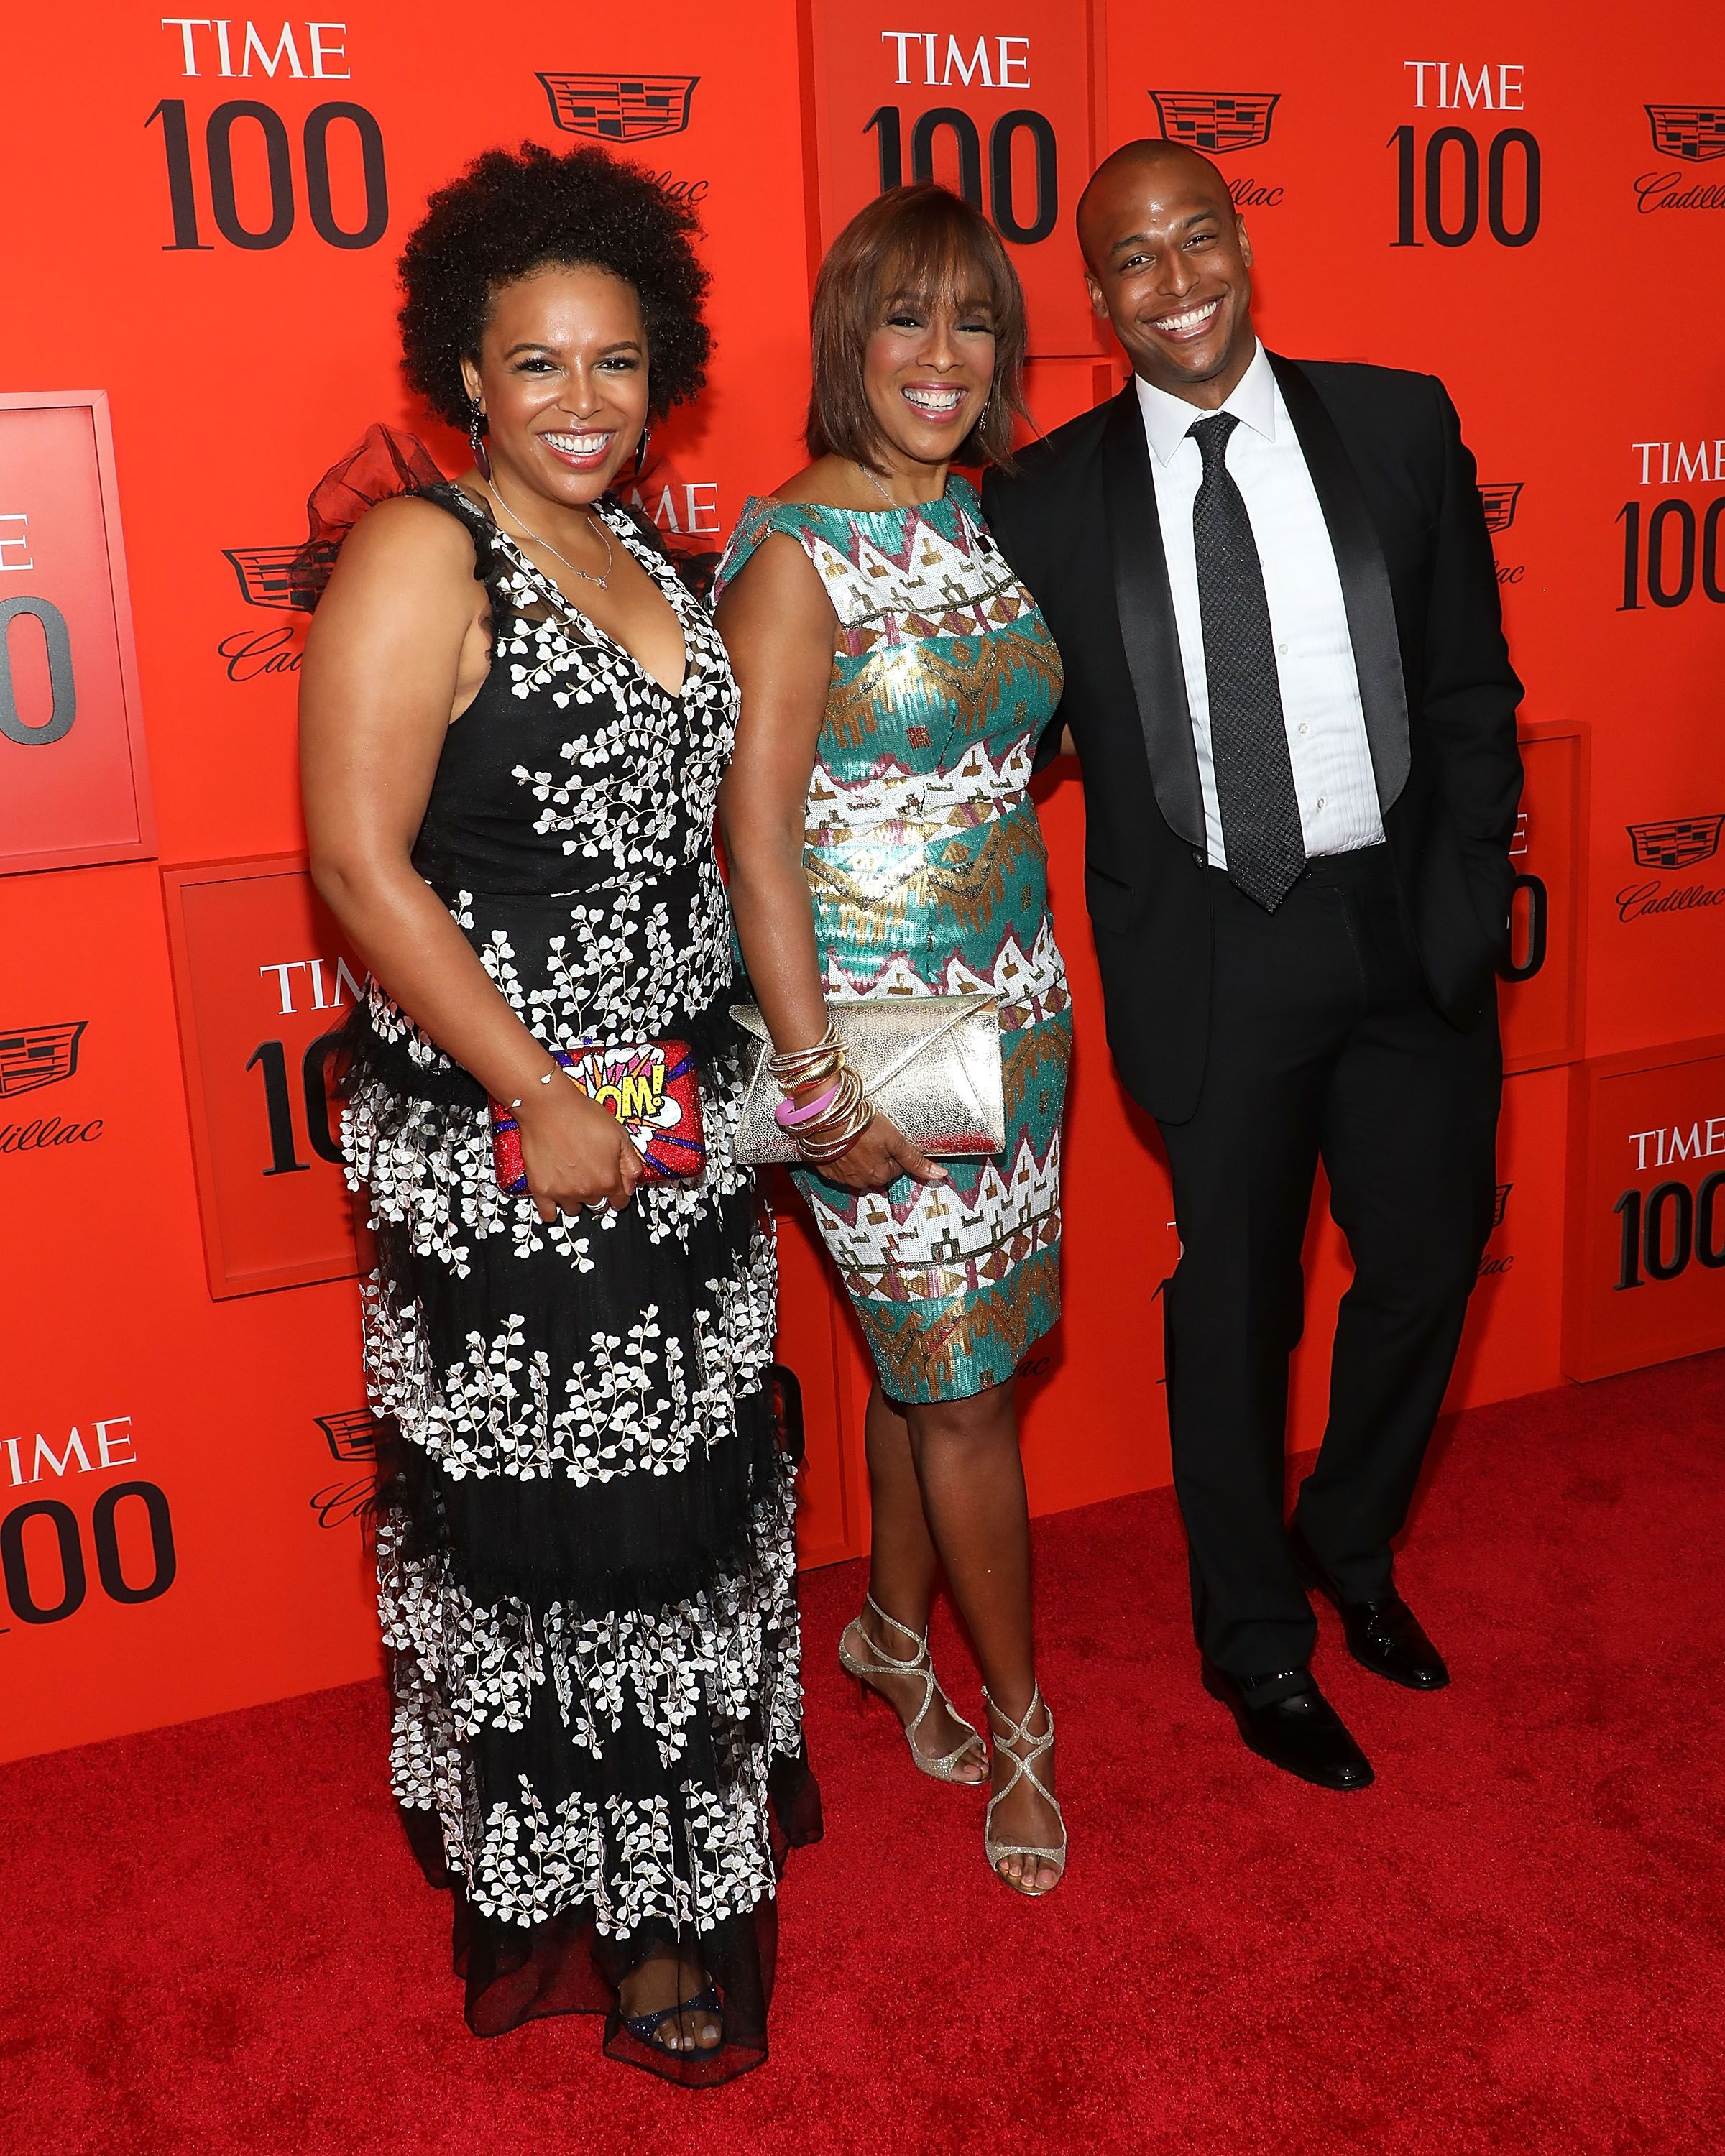 Gayle King with her kids, Kirby Bumpus and William Bumpus, Jr., during the 2019 Time 100 Gala at Frederick P. Rose Hall, Jazz at Lincoln Center on April 23, 2019, in New York City. | Source: Getty Images